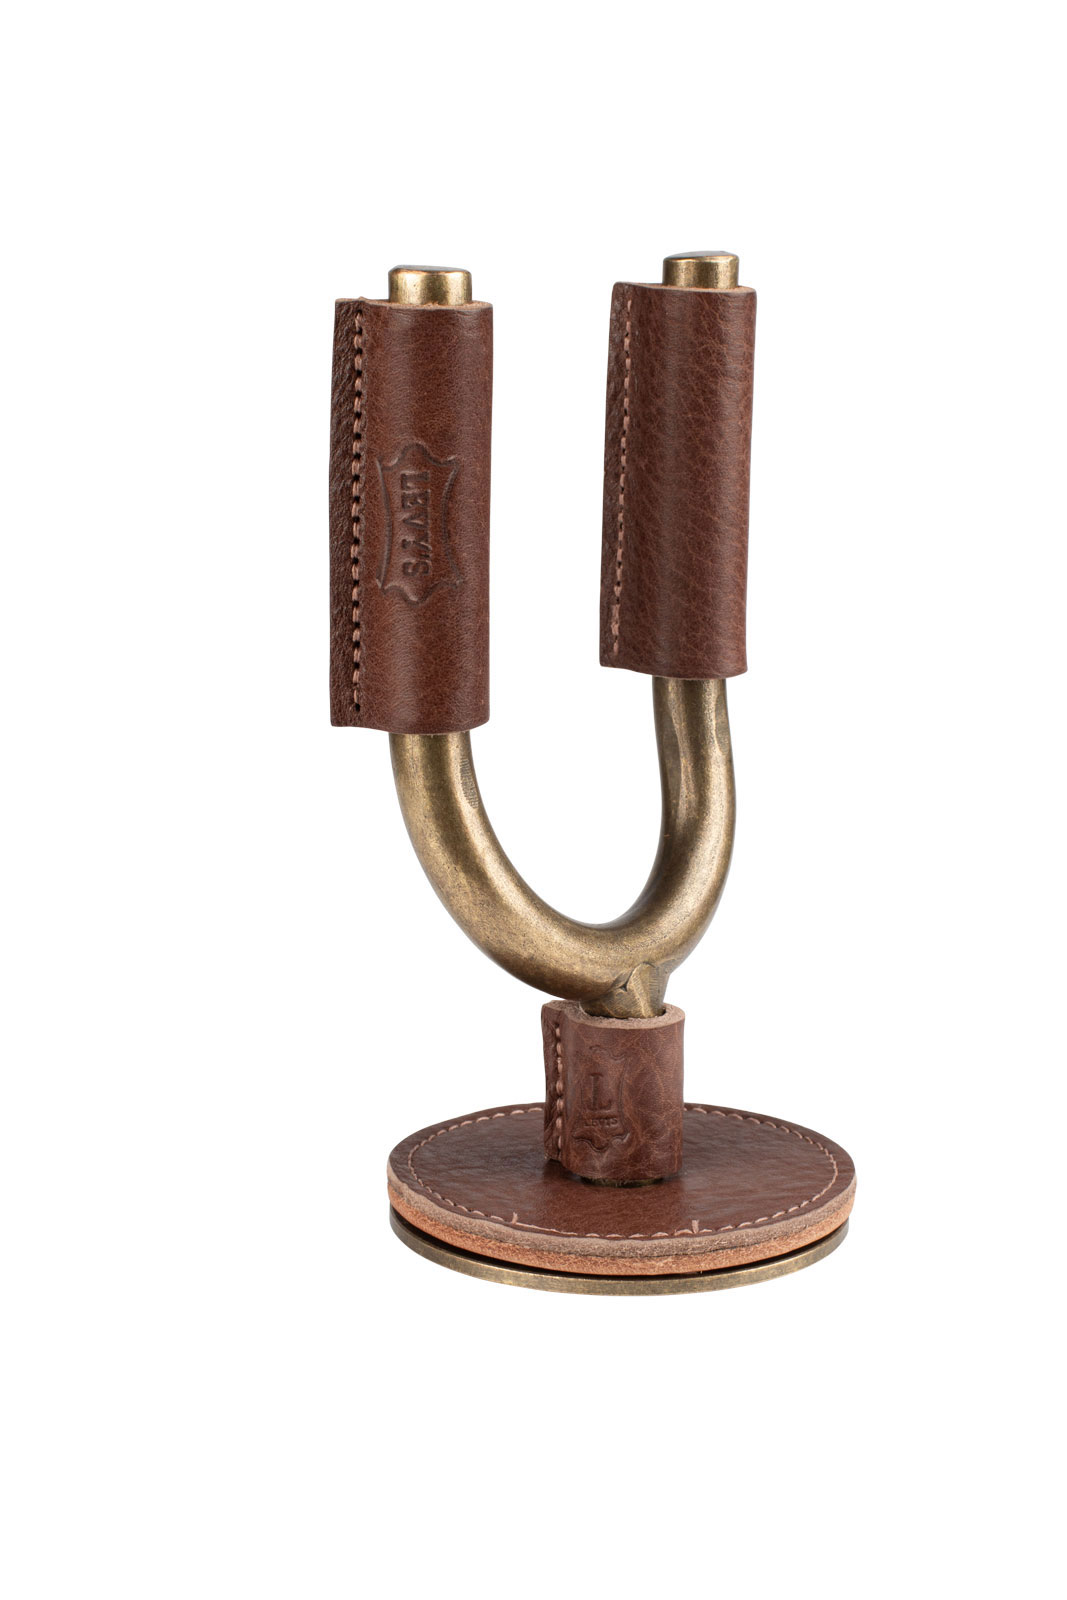 LEVY'S FGHNGR-BRBN WALL STAND IN WROUGHT IRON BRASS WITH LEATHER PROTECTIONS